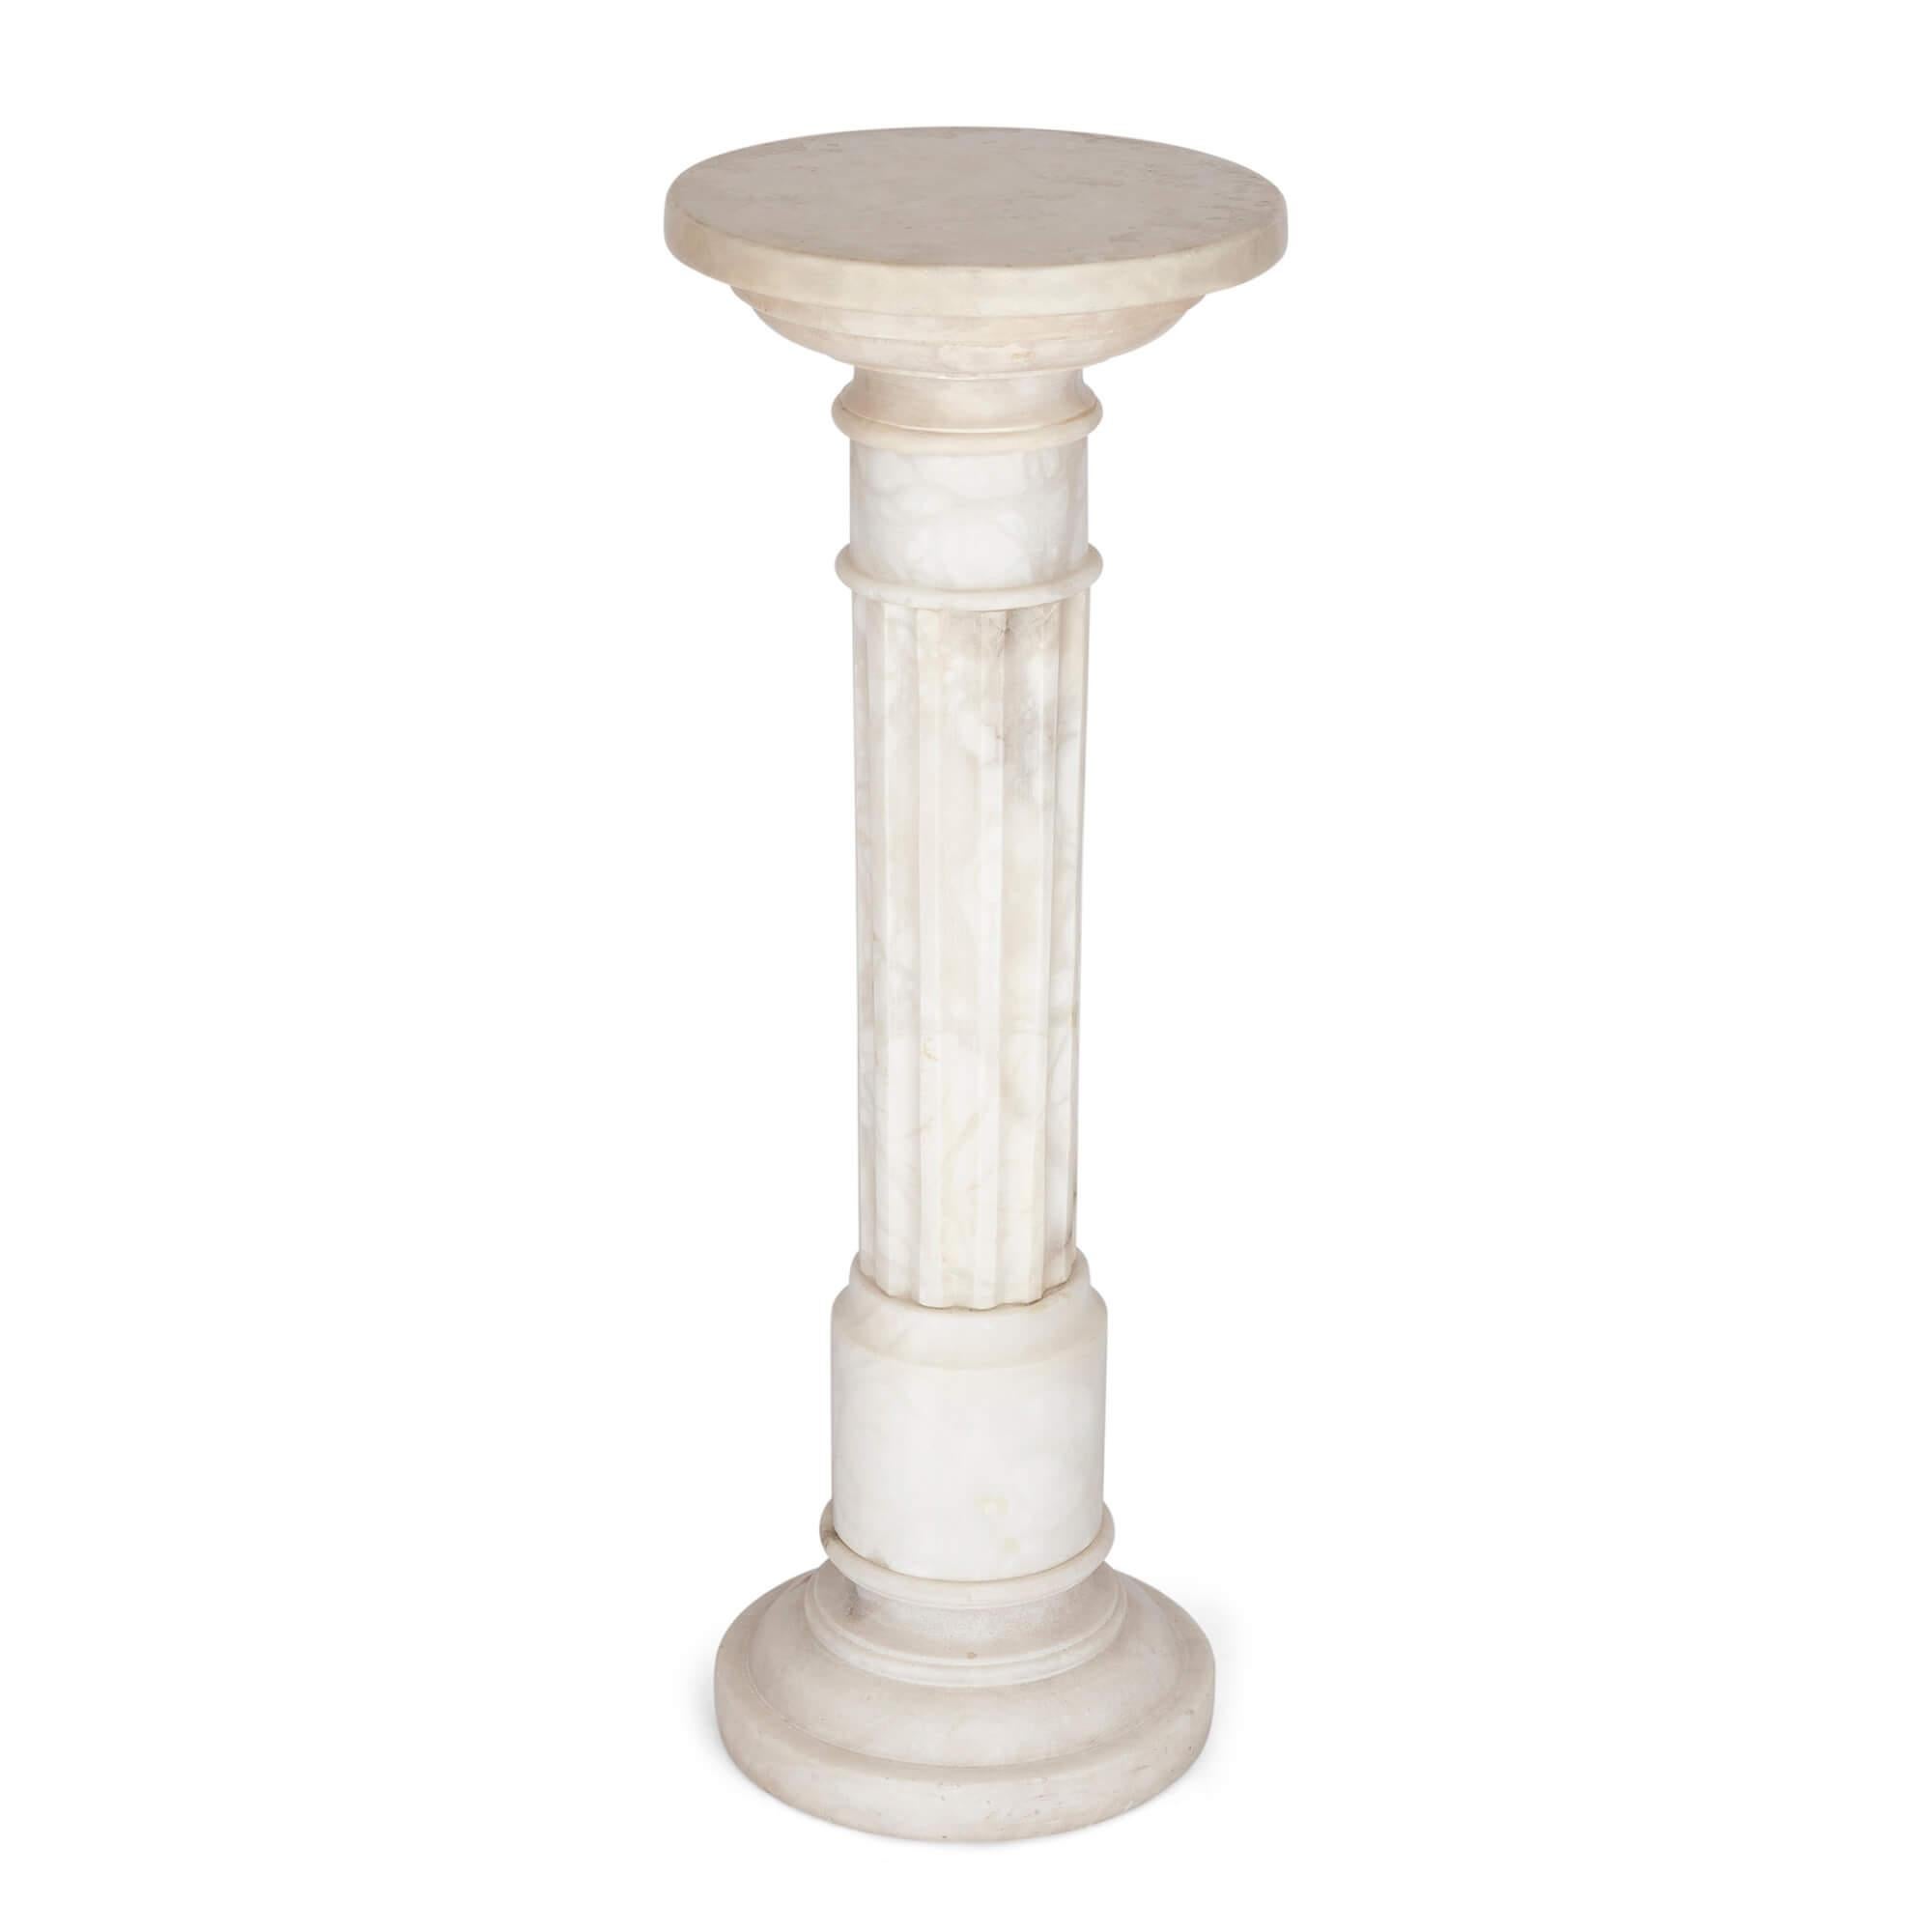 French antique alabaster pedestal
French, Late 19th Century 
Height 80cm, diameter 30.5cm

Shaped in a Neoclassical style form, this superb pure white alabaster pedestal was manufactured in nineteenth century France. 

The top of the pedestal